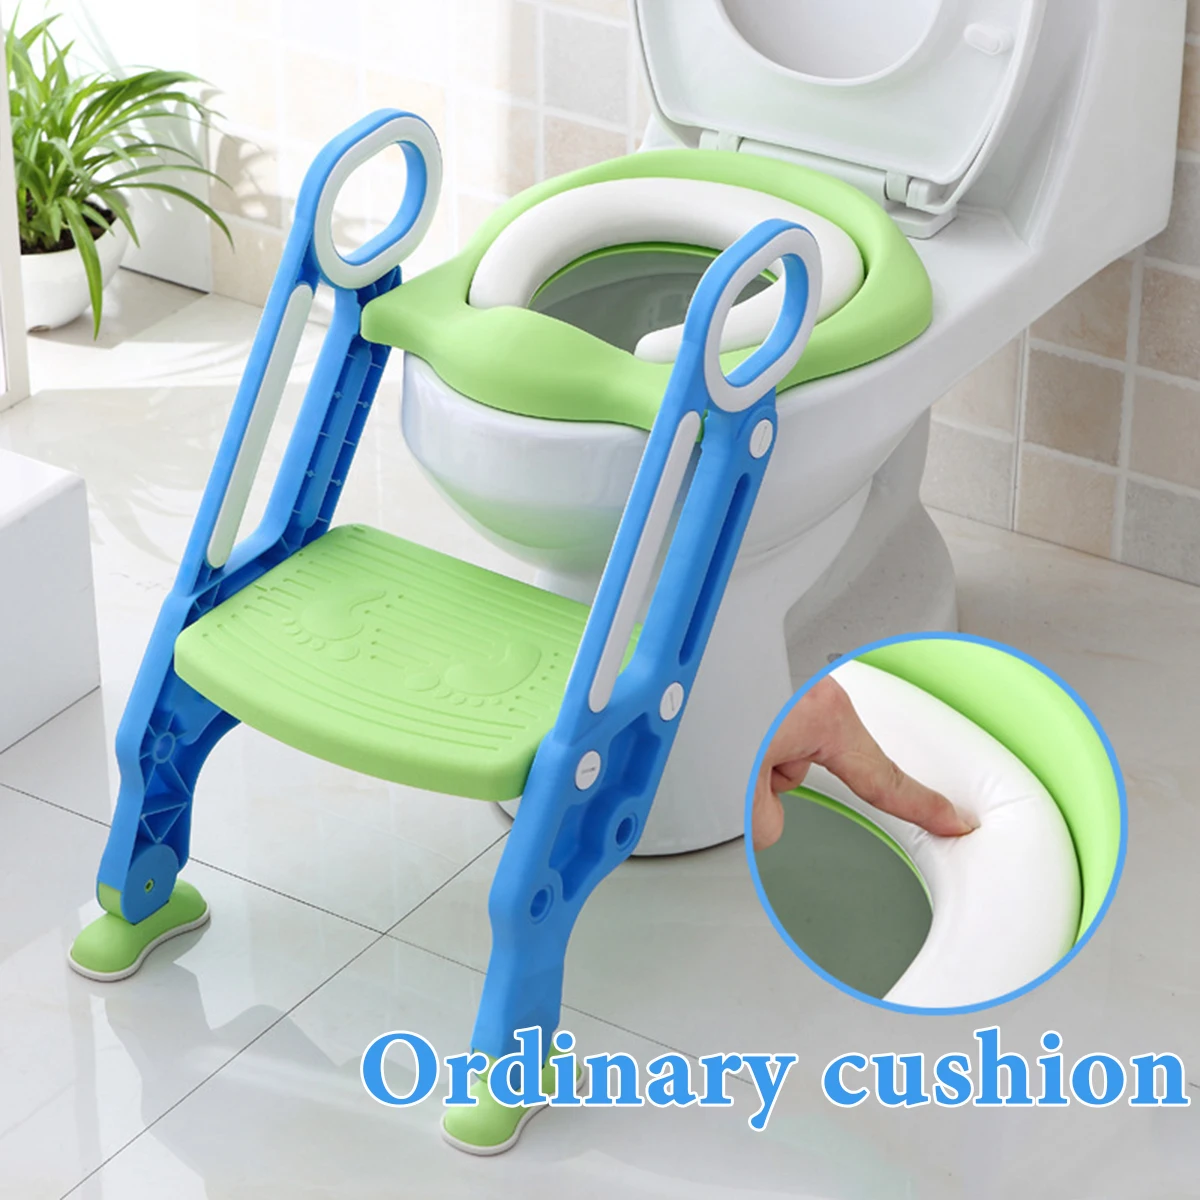 New Baby Potty Training Seat Children's Potty Baby Toilet Seat With Adjustable Ladder Infant Toilet Training Folding Seat